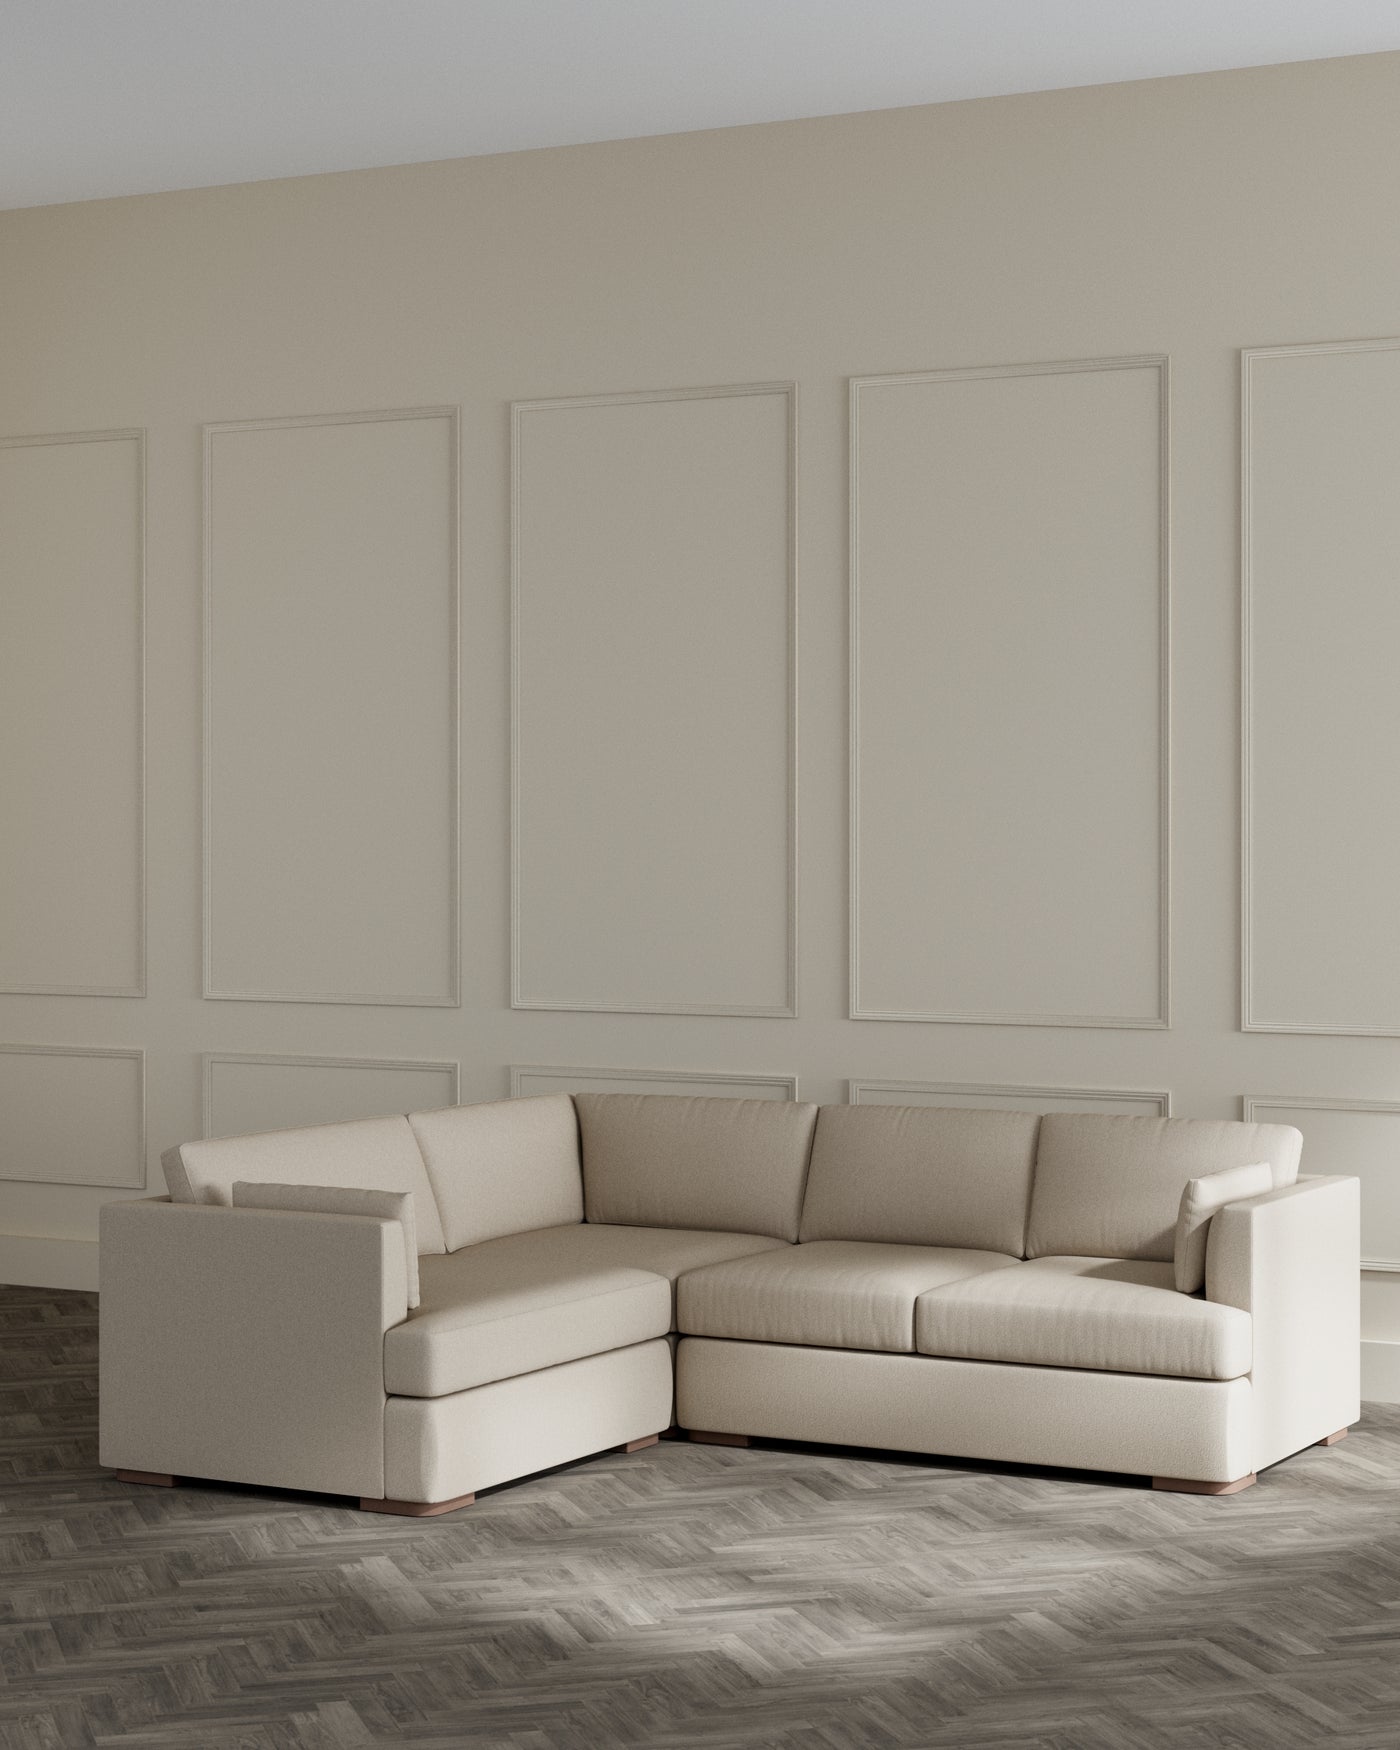 Modern beige L-shaped sectional sofa with clean lines and a minimalist design, featuring plush cushioning, subtle tufting detail, and a low-profile silhouette, set against a neutral wall and herringbone wood flooring.